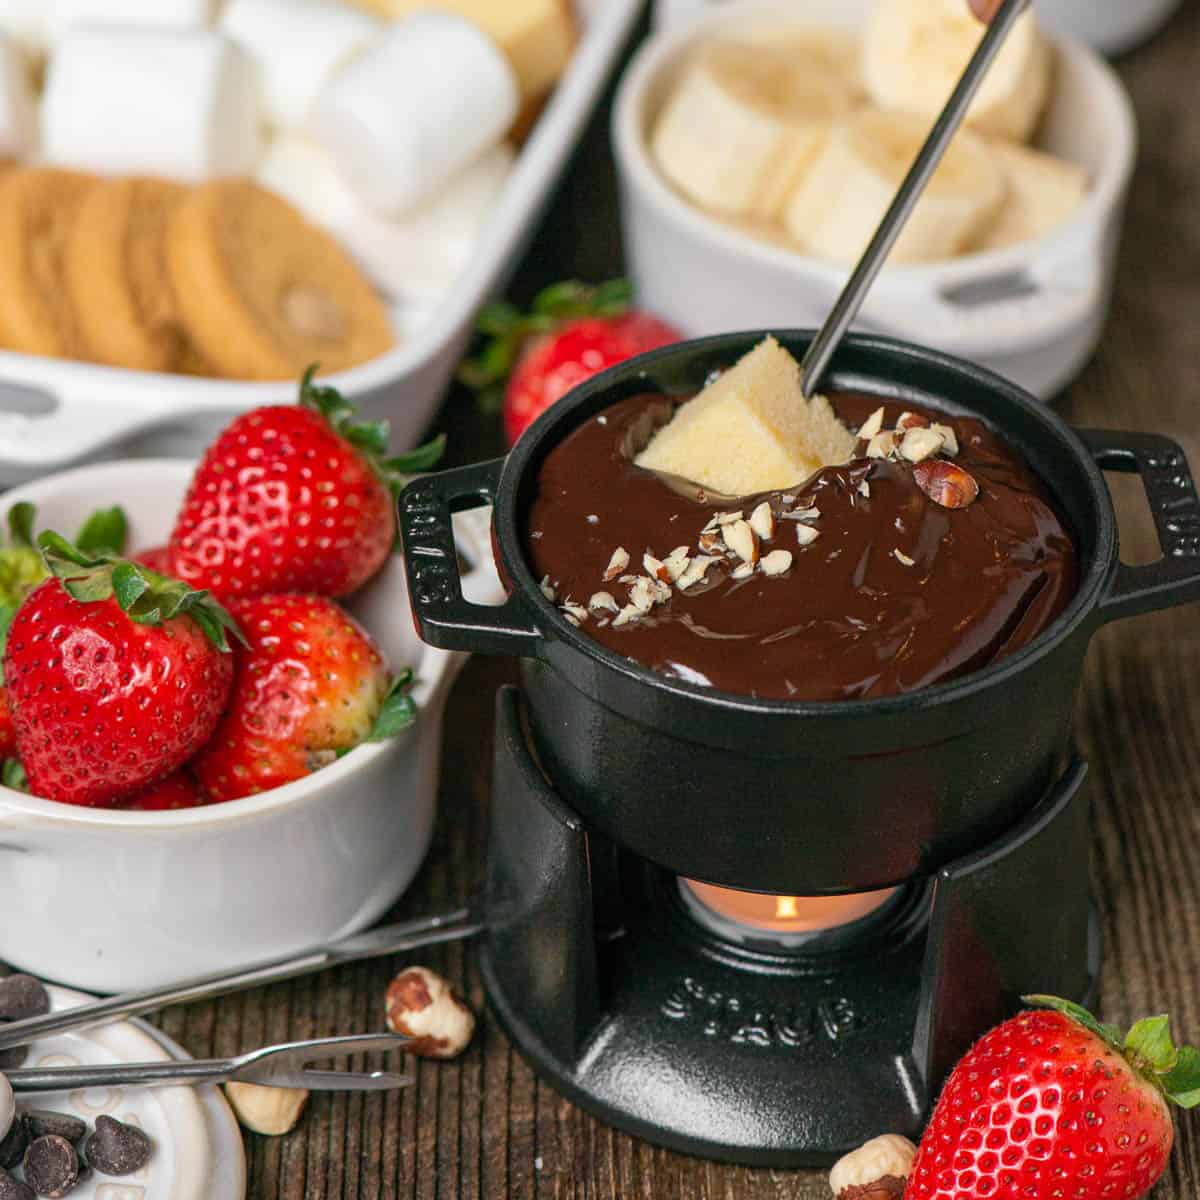 The Best Chocolate Fondue Dippers